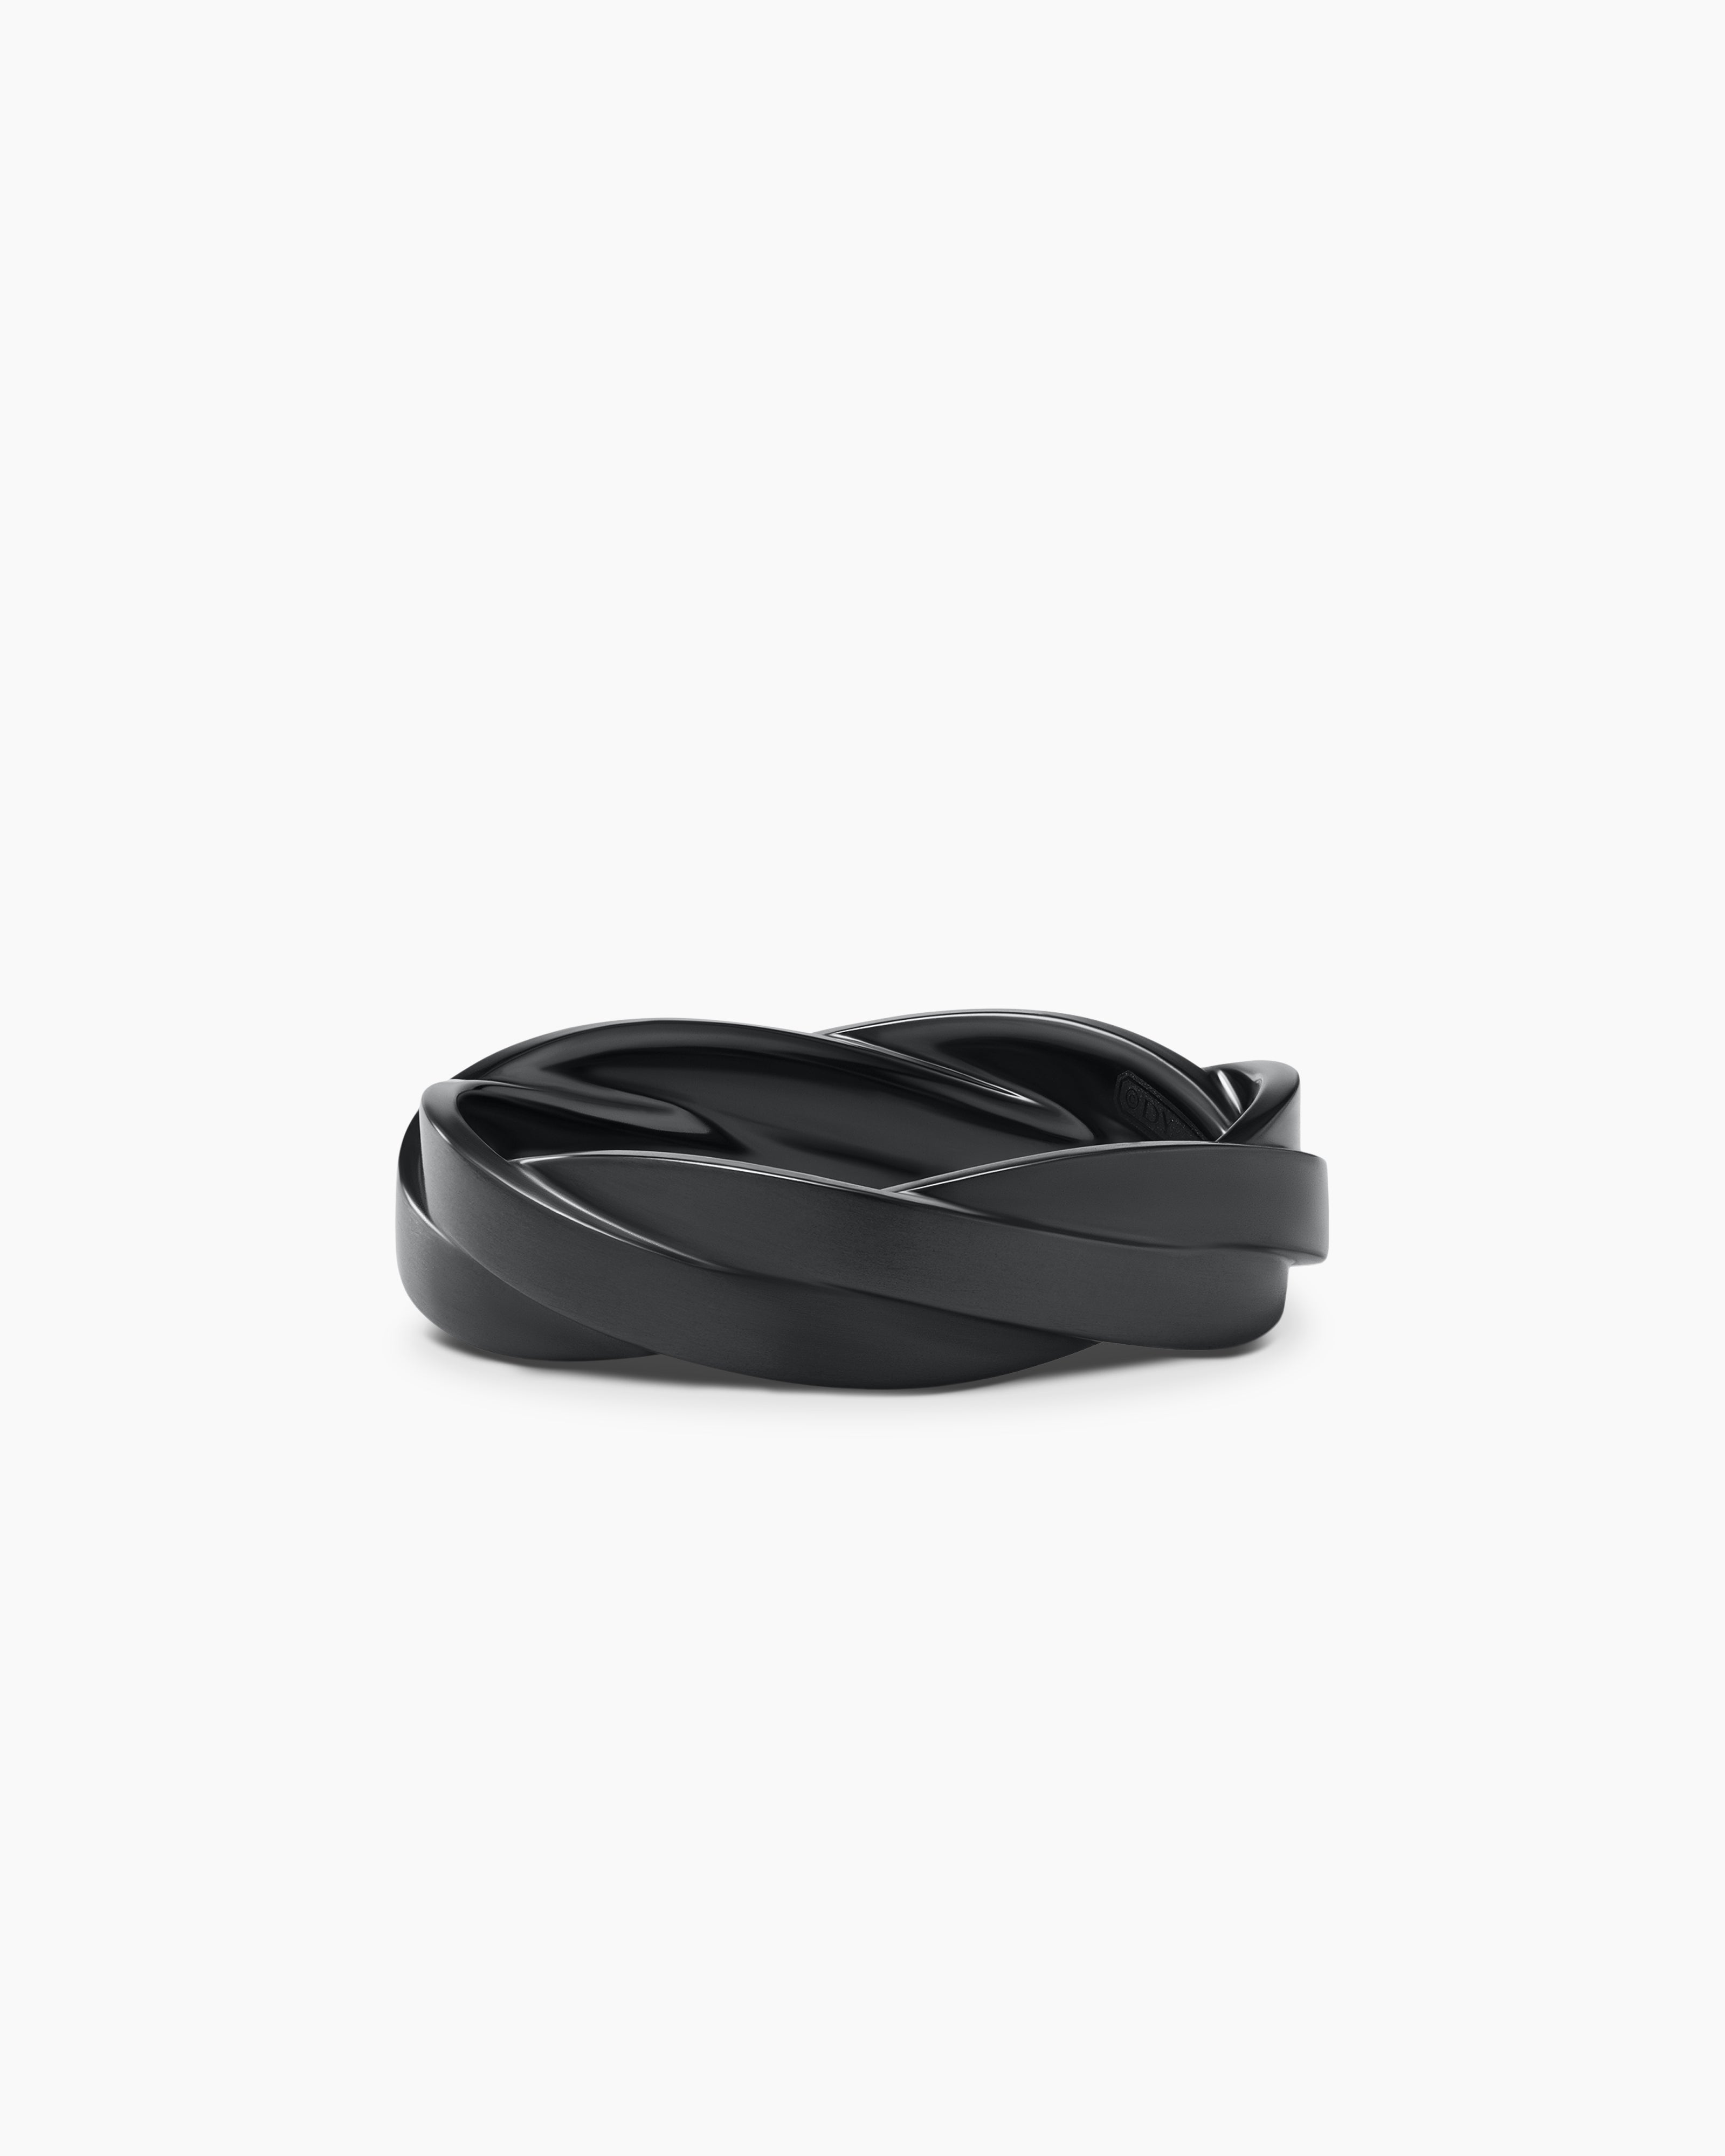 Buy African Rubber Bands/black Power Rubber Bands/black Rubber Bands/african  Bands/rubber Bangles/rubber Bracelets/black Power Bands Online in India -  Etsy